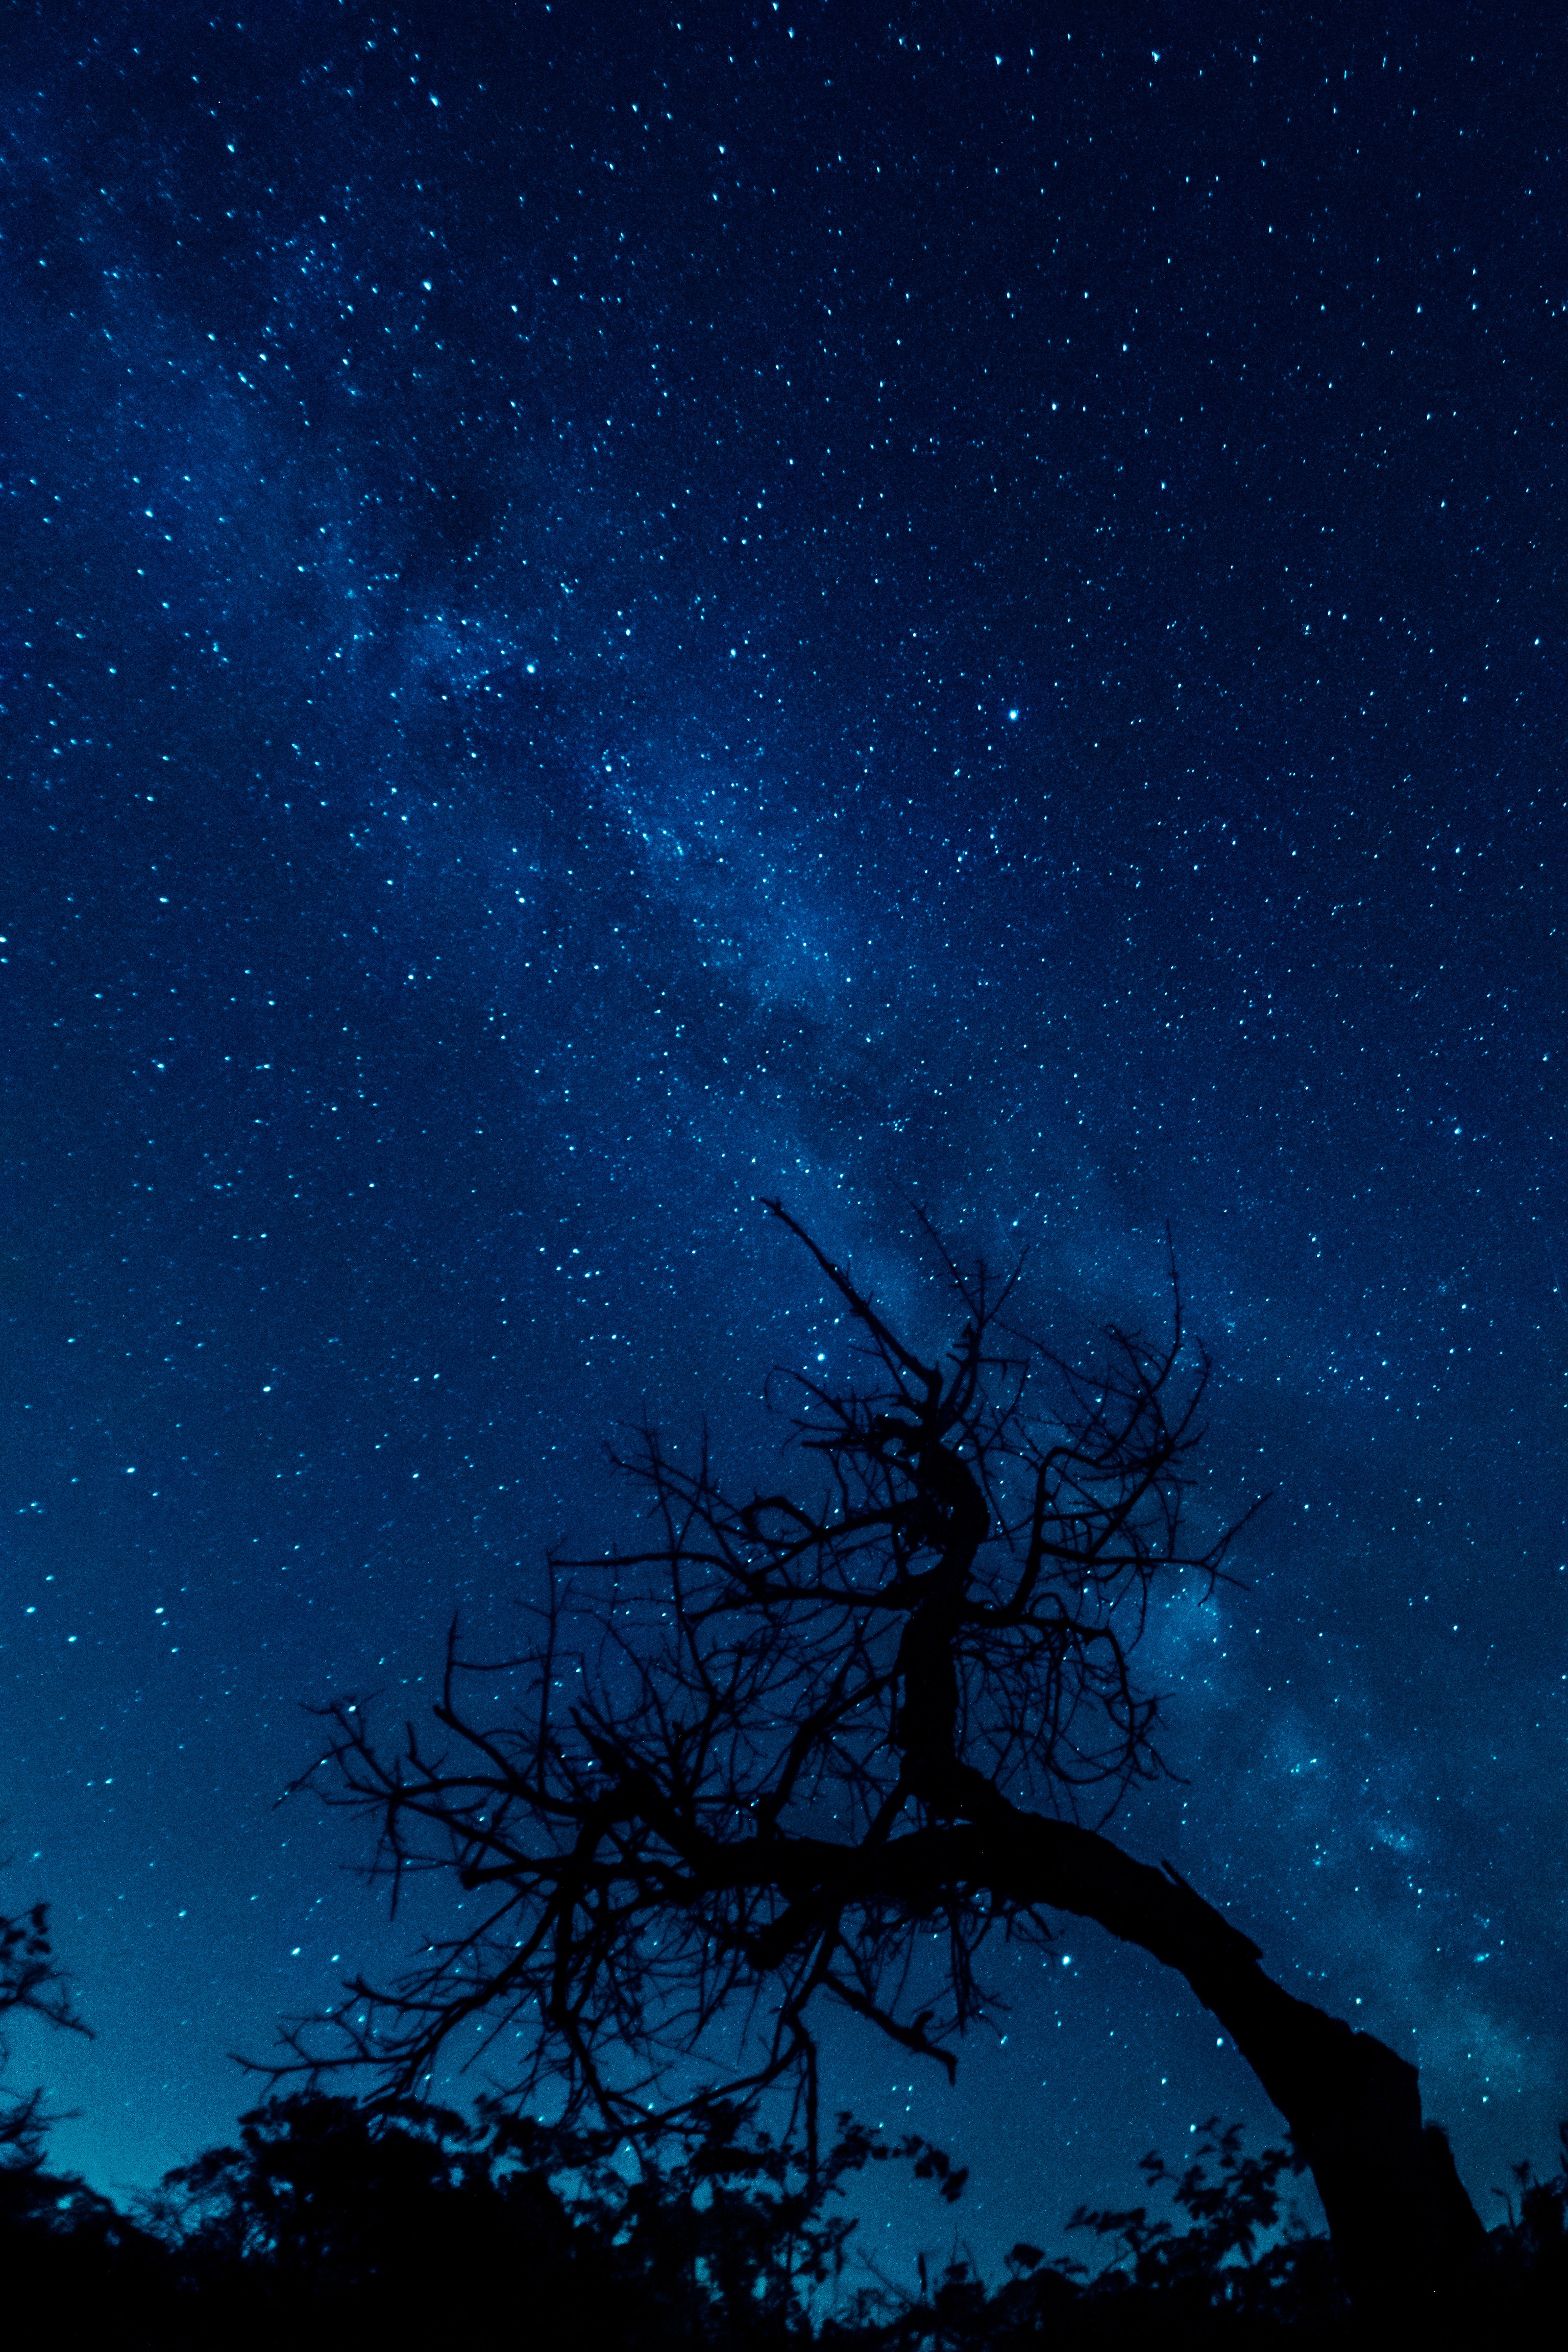 Milky Way Night And Bare Trees Wallpapers